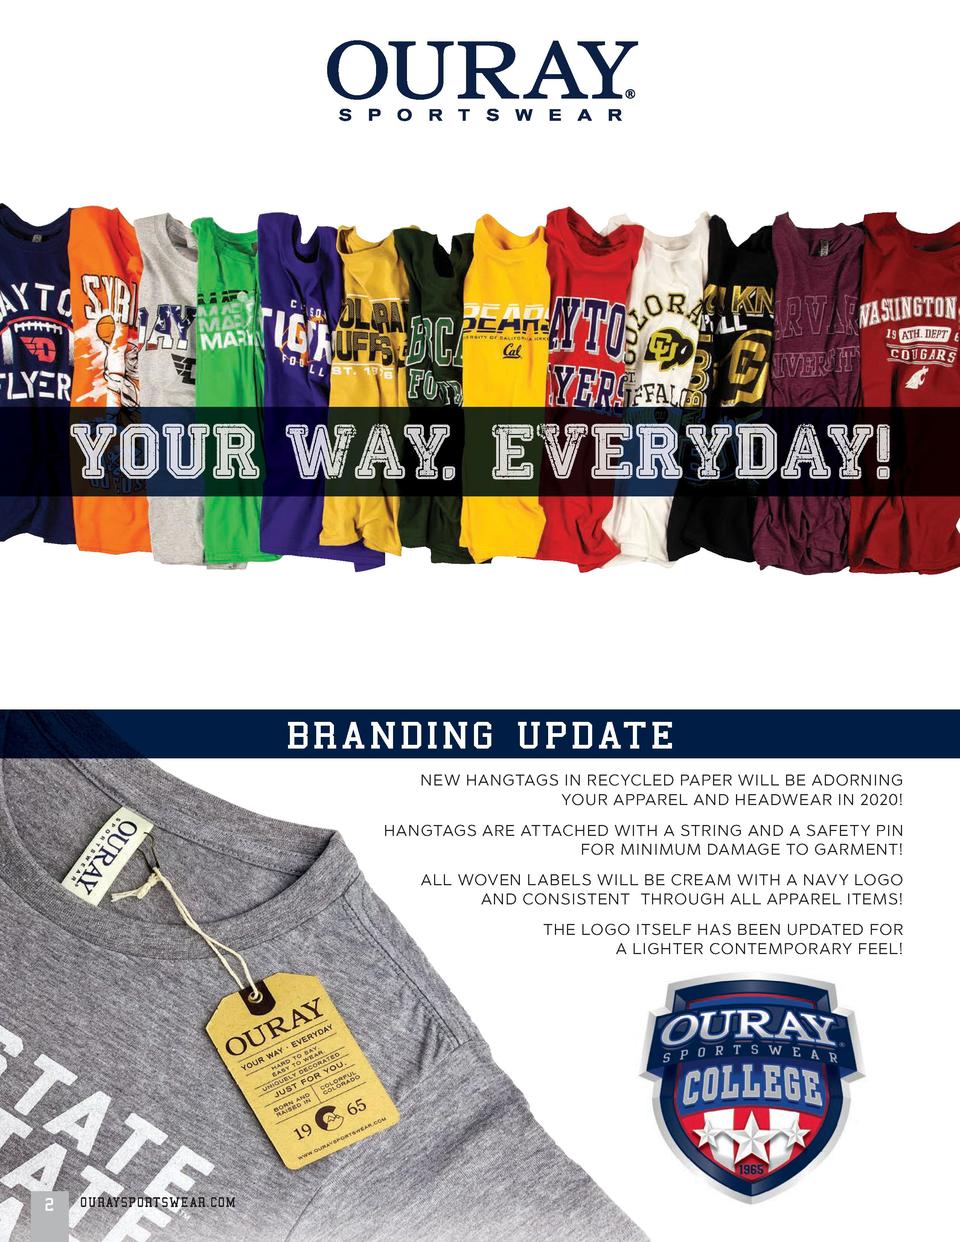 2020 Ouray Sportswear College